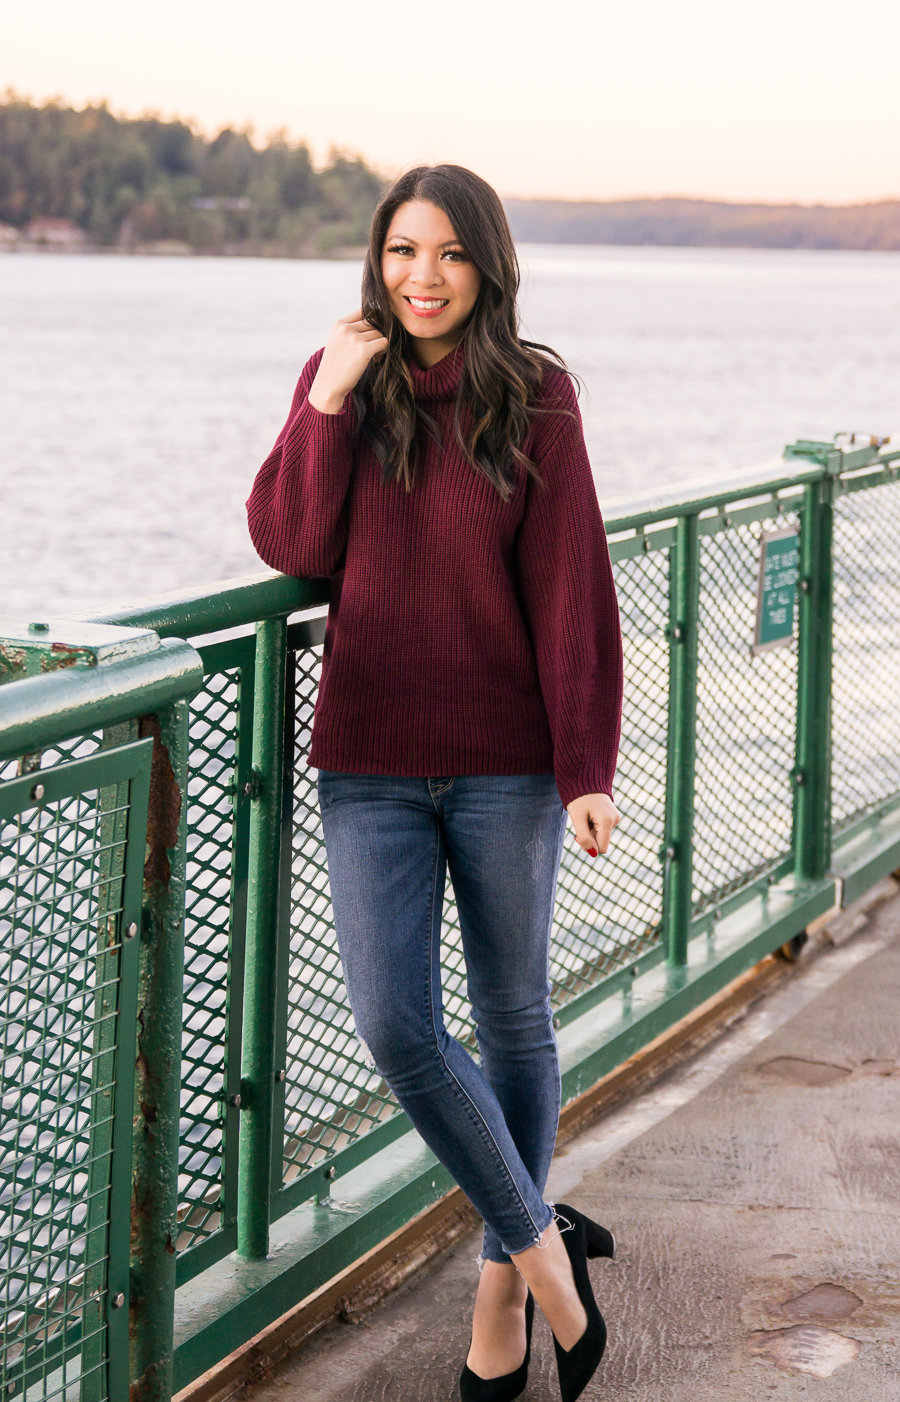 Burgundy turtleneck sweater, cheetah or leopard clutch, simple fall outfit, Seattle fashion blog, San Juan Islands Friday Harbor